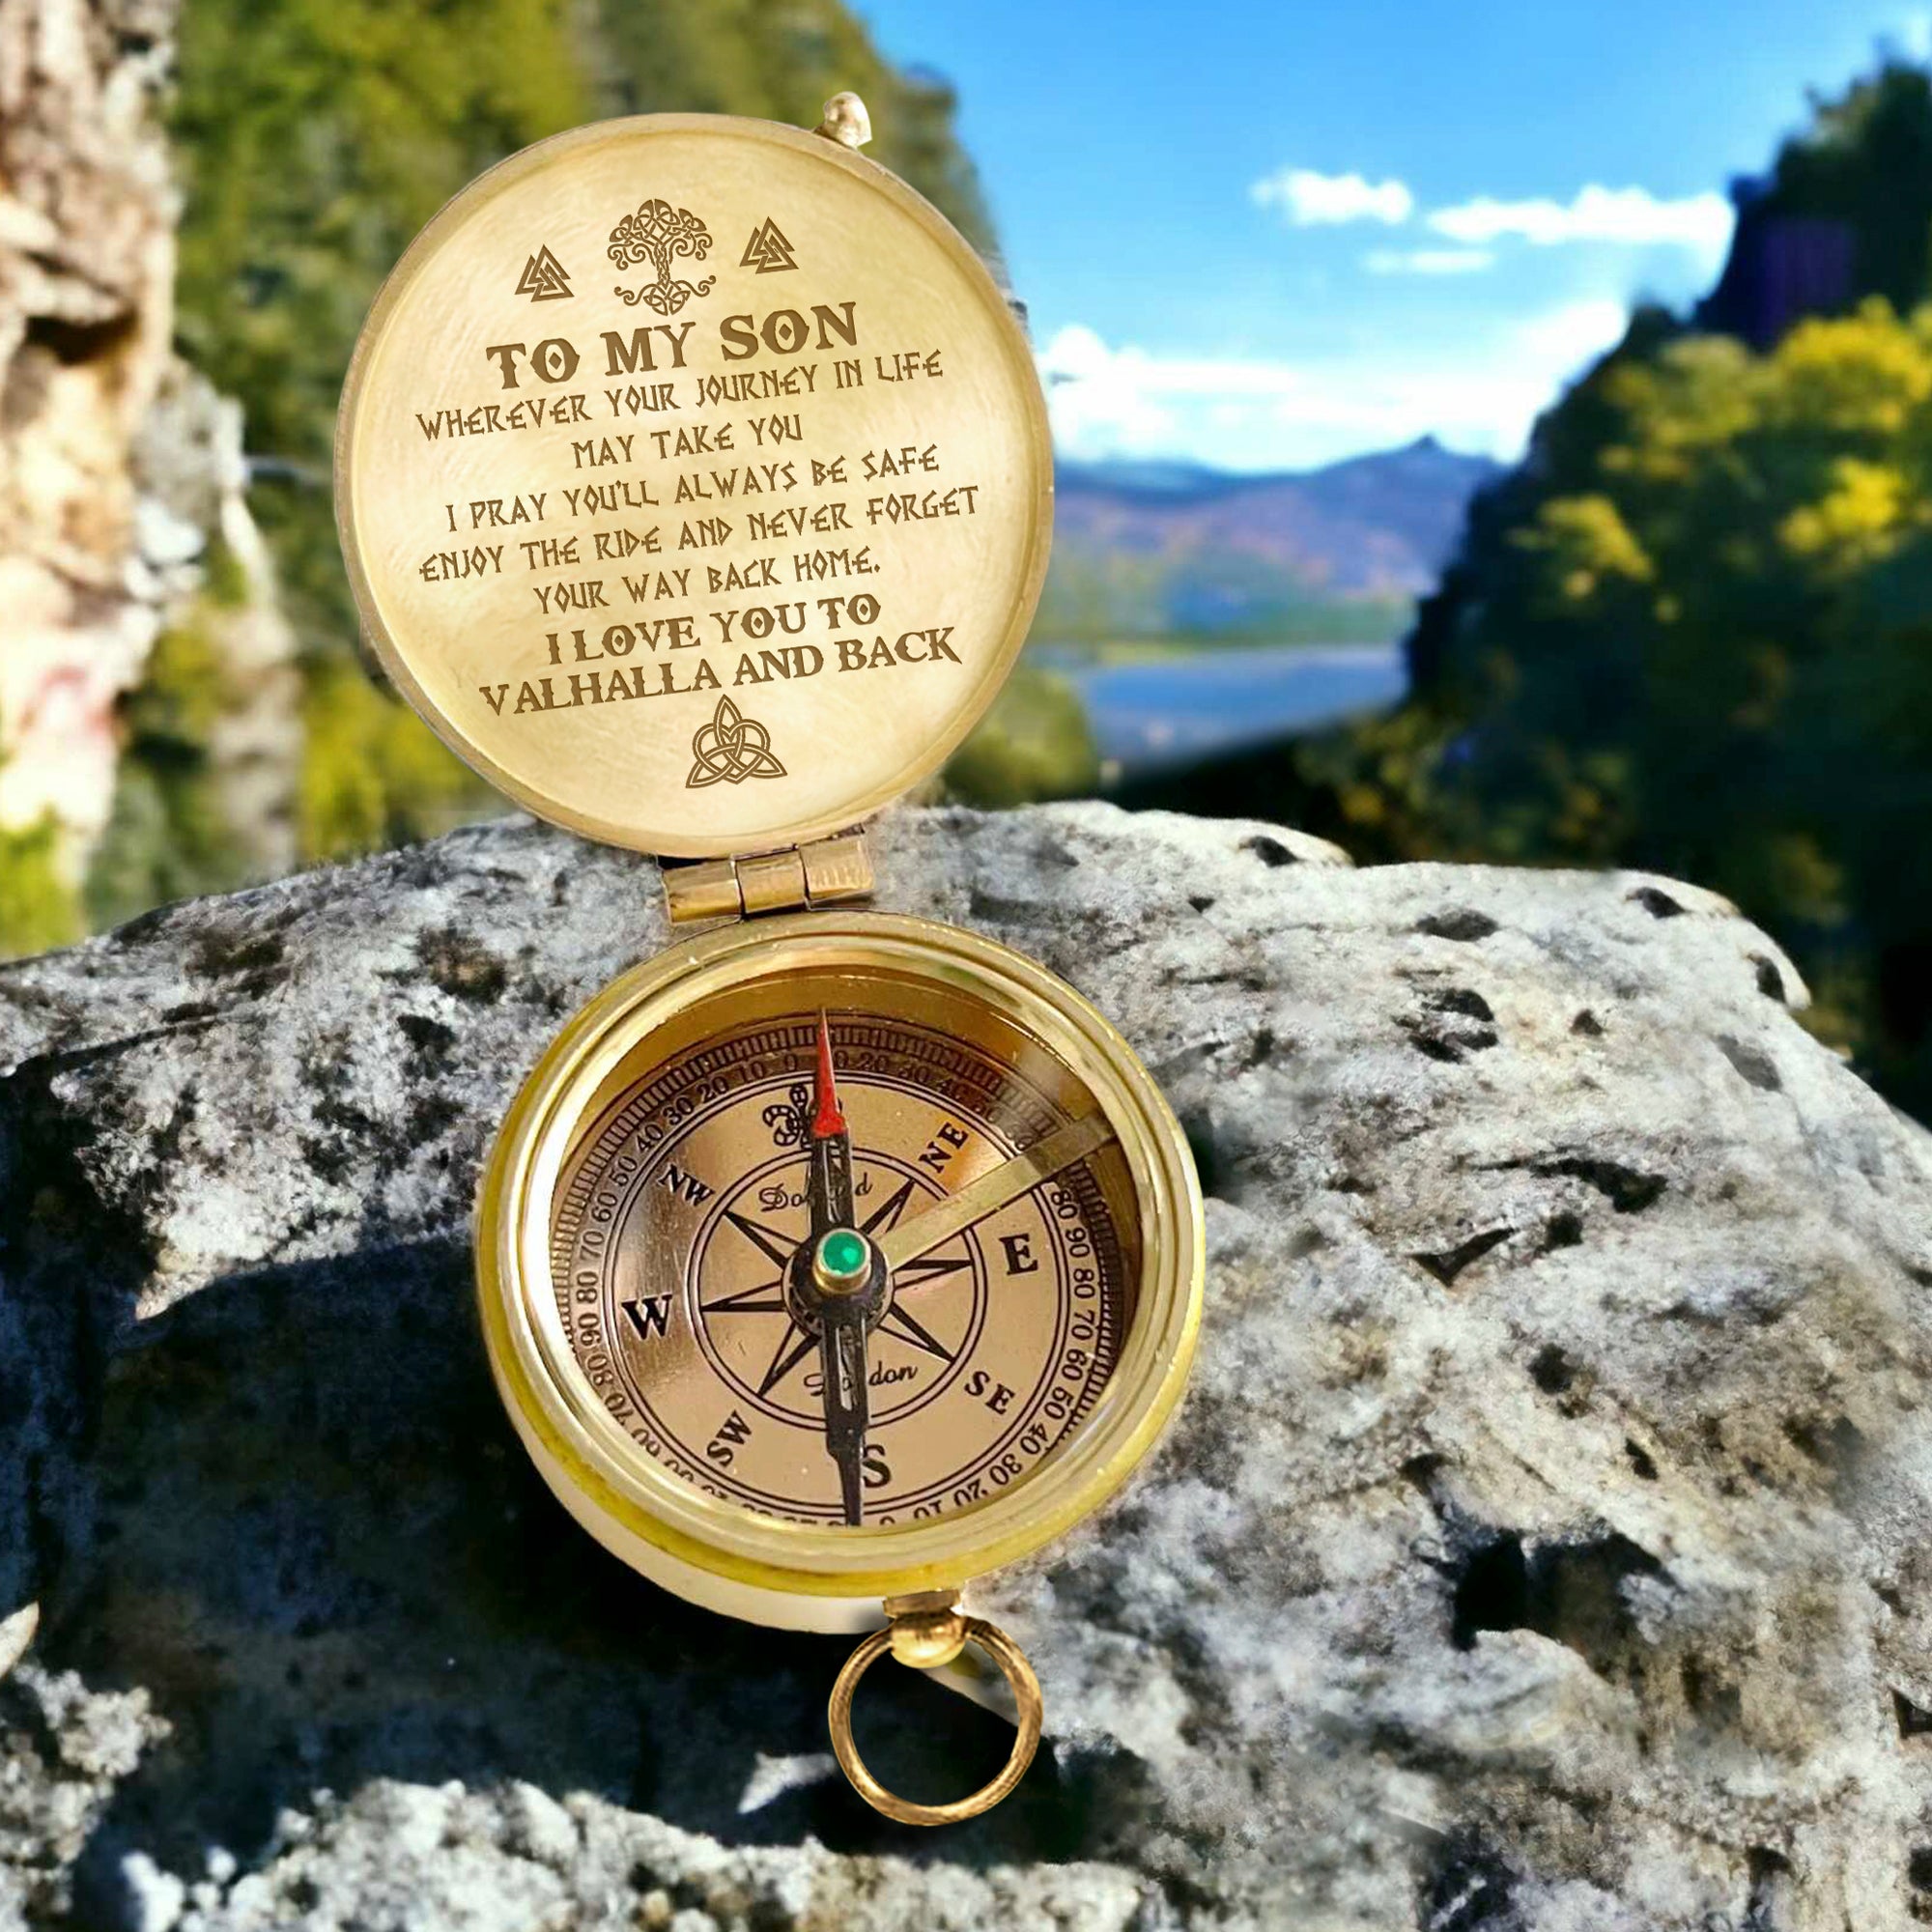 Engraved Compass - Viking - To My Son - I Pray You’ll Always Be Safe - Gpb16054